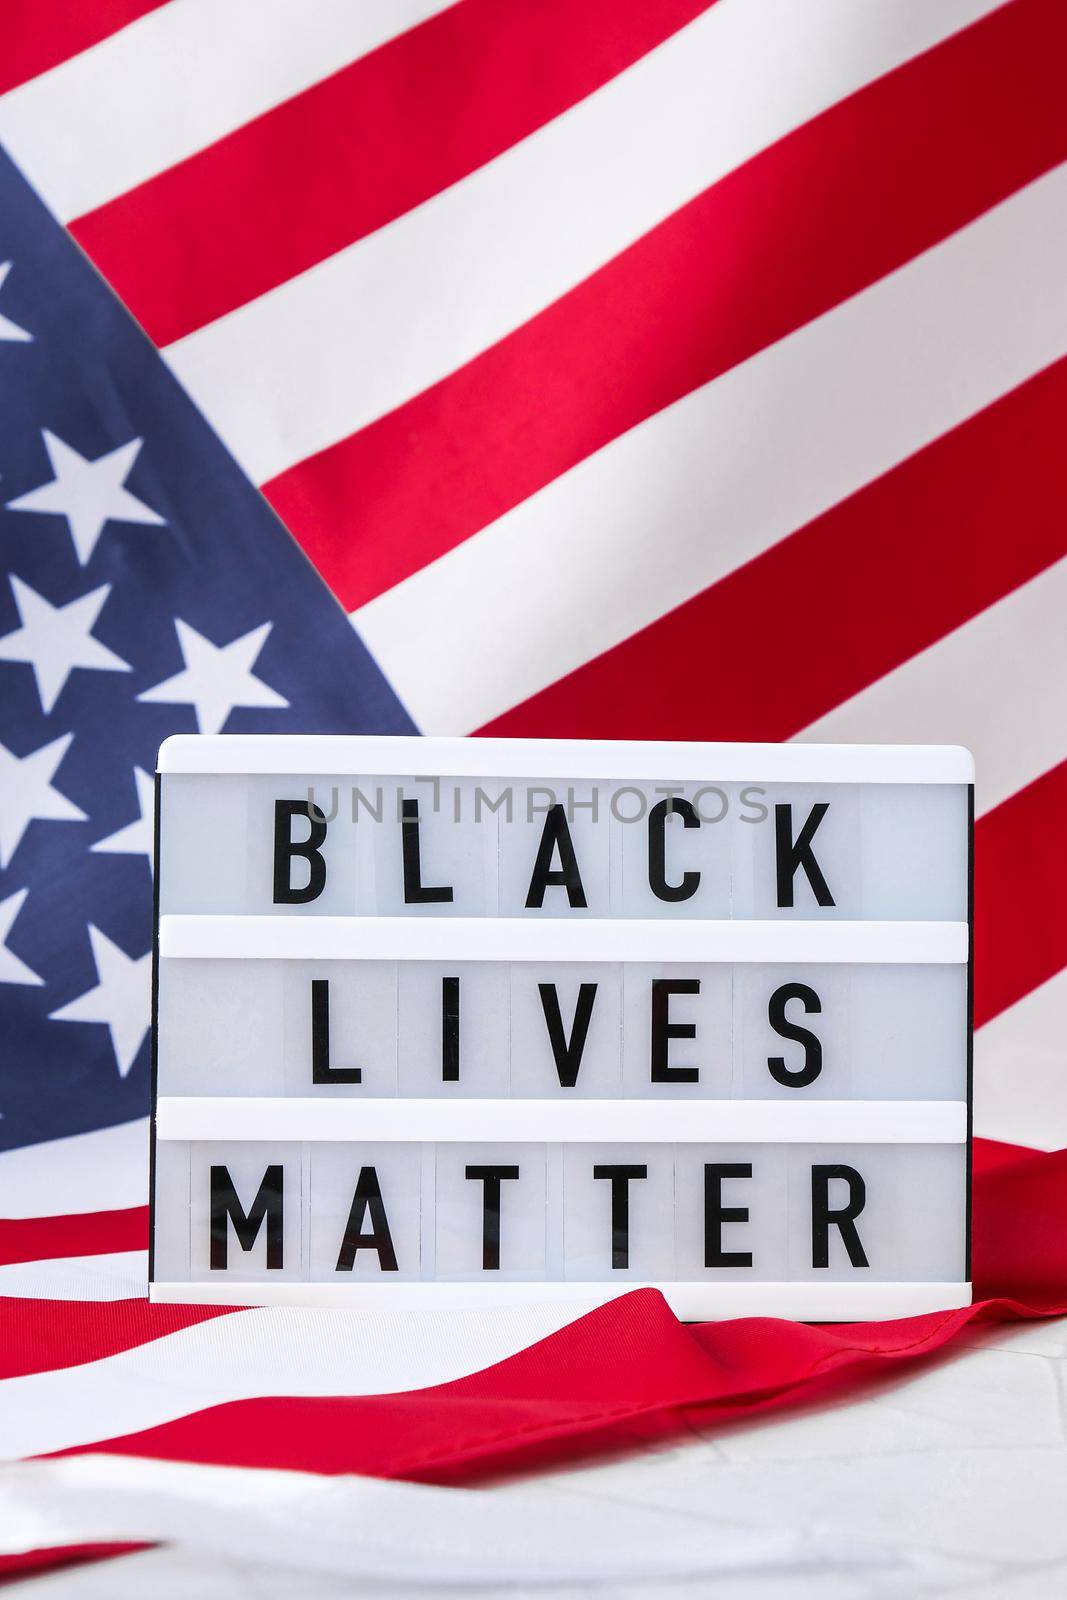 American flag. Lightbox with text BLACK LIVES MATTER Flag of the united states of America. July 4th Independence Day. USA patriotism national holiday. Usa proud. Freedom concept